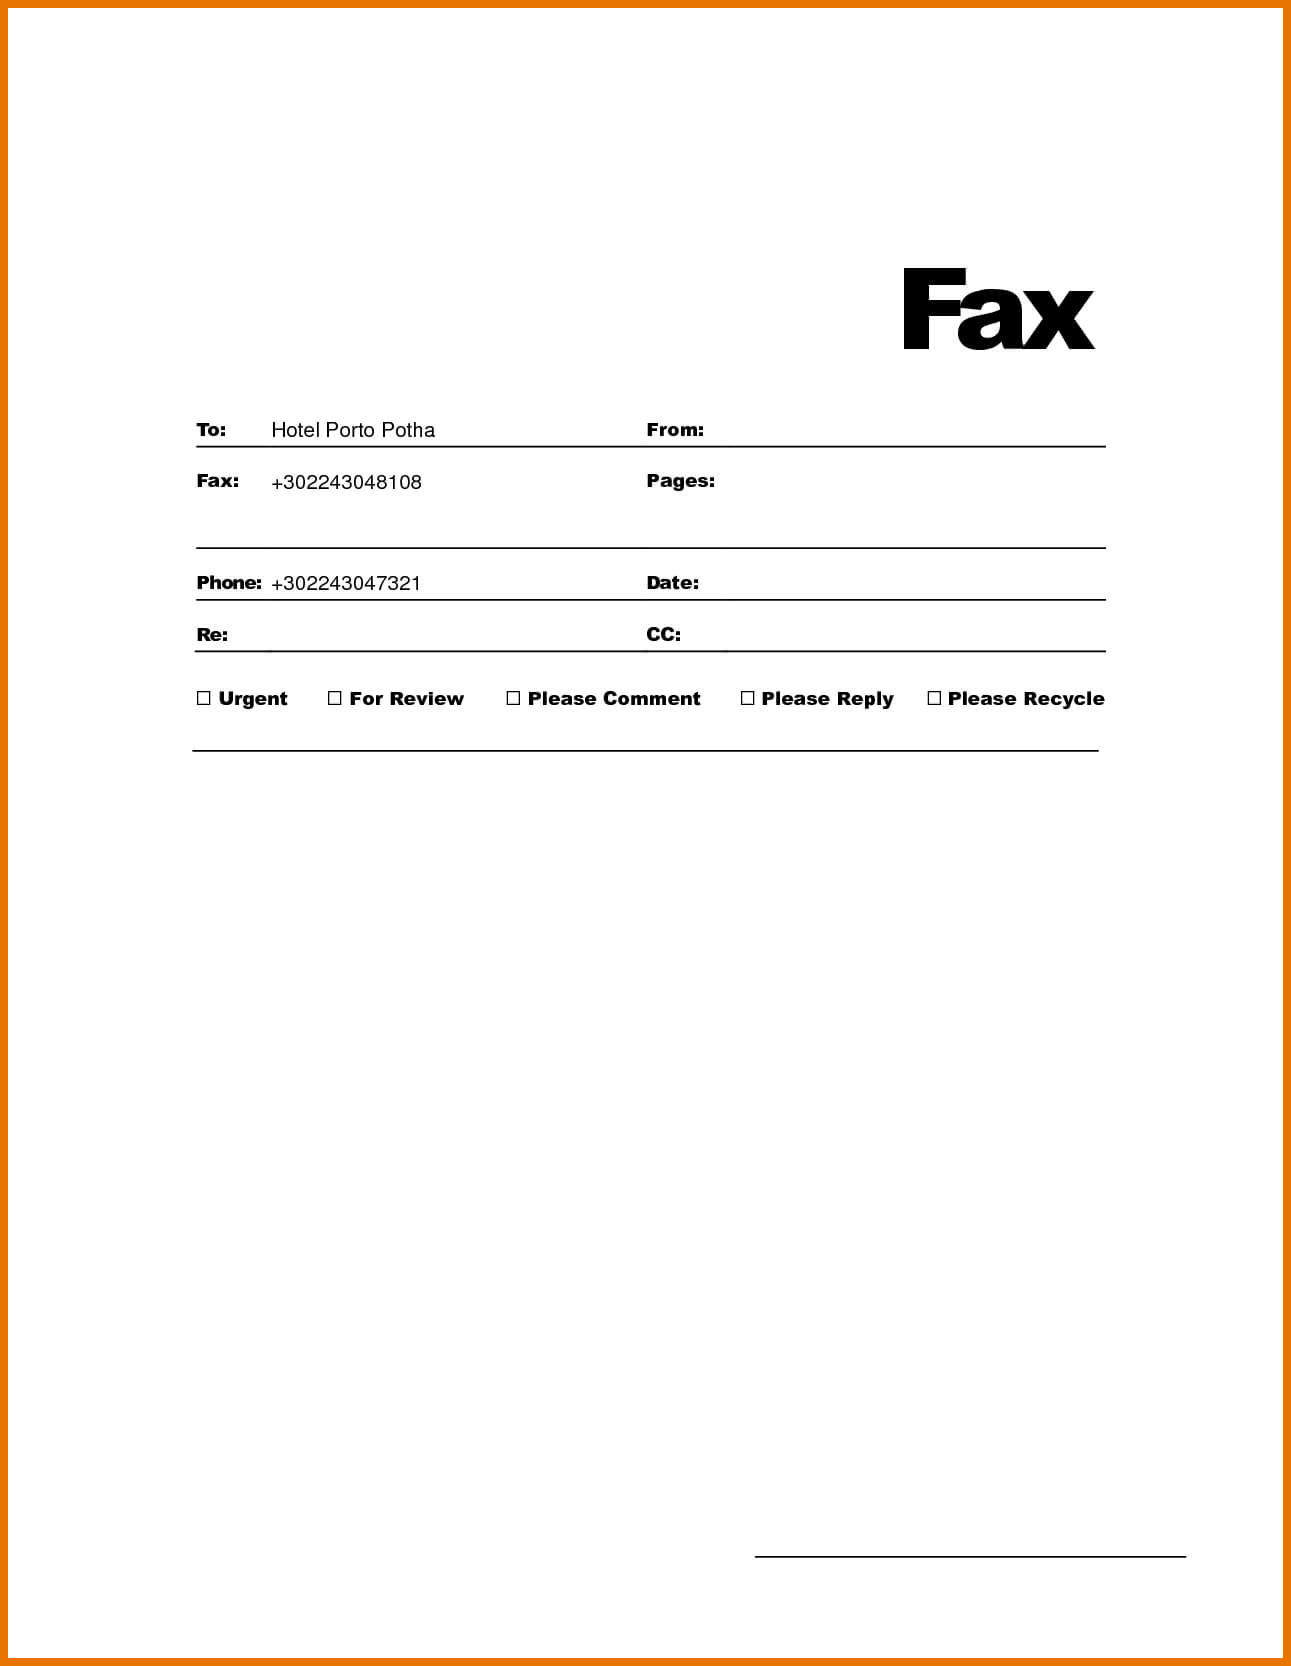 026 Microsoft Word Fax Cover Sheet Template Ideas Openoffice With Regard To Fax Cover Sheet Template Word 2010